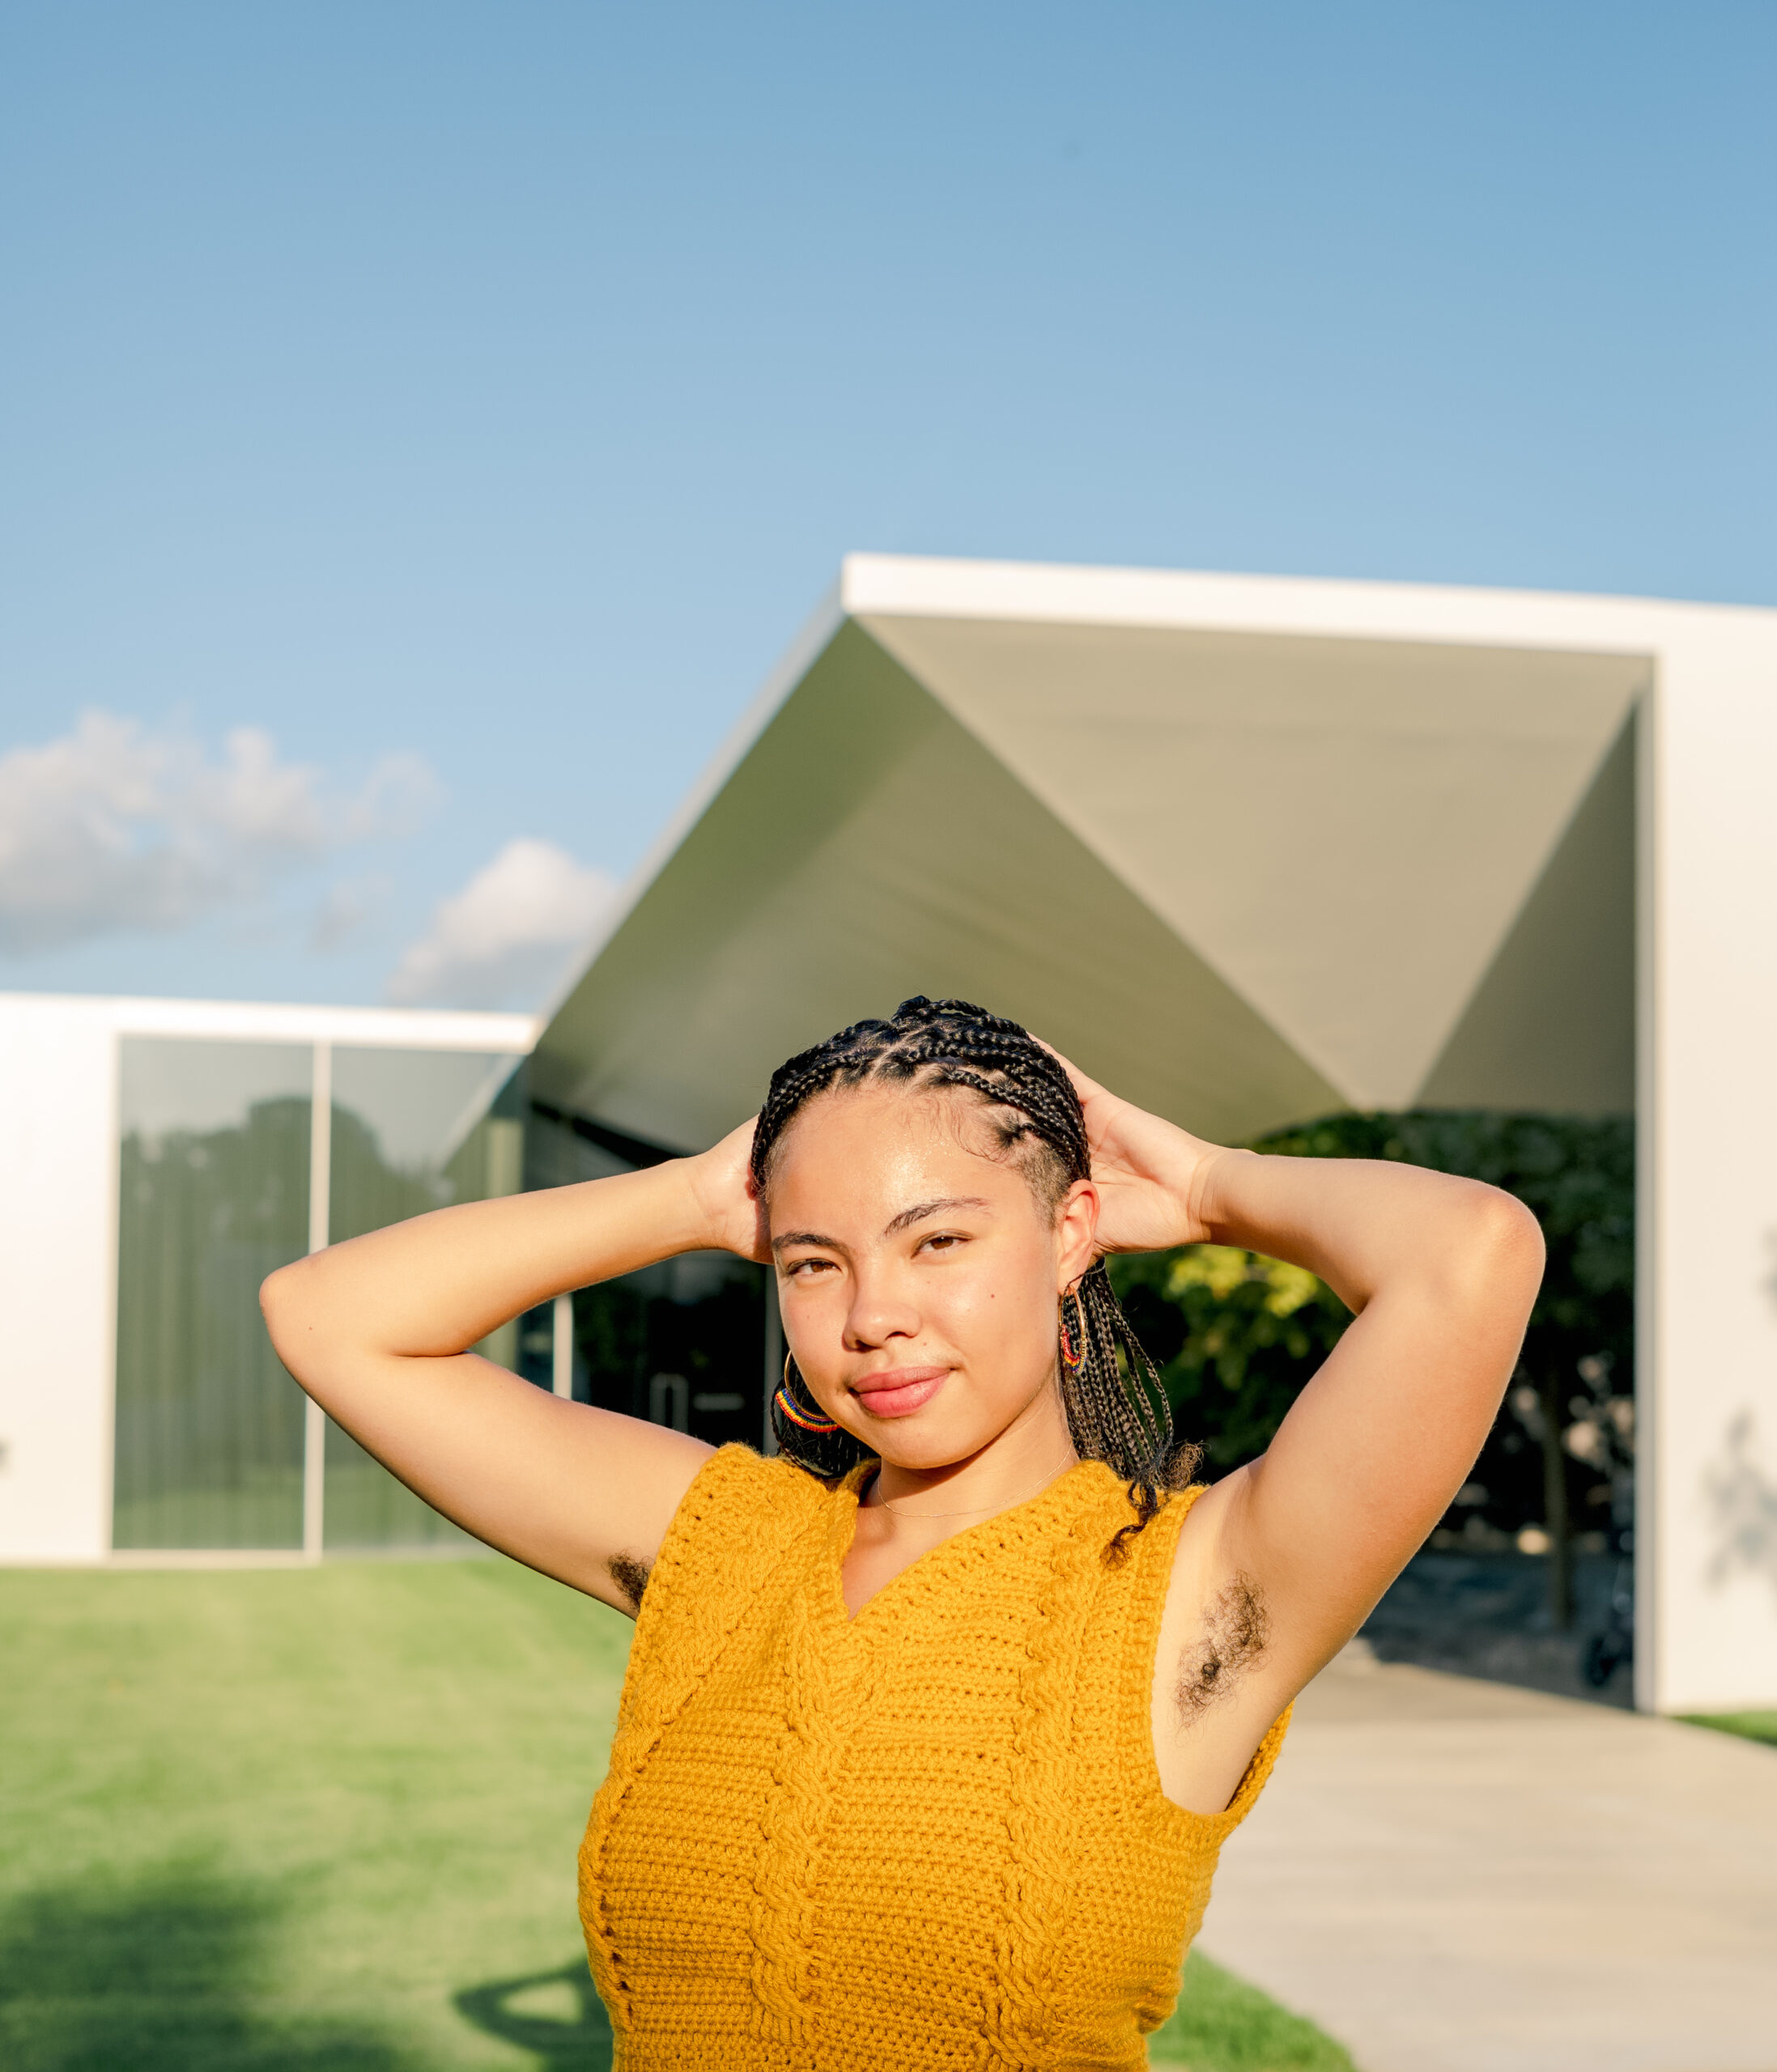 Irene Vázquez in a sleeveless yellow sweater in front of a modern building. Her hair is in braids and her arms are lifted with her hands behind her head.